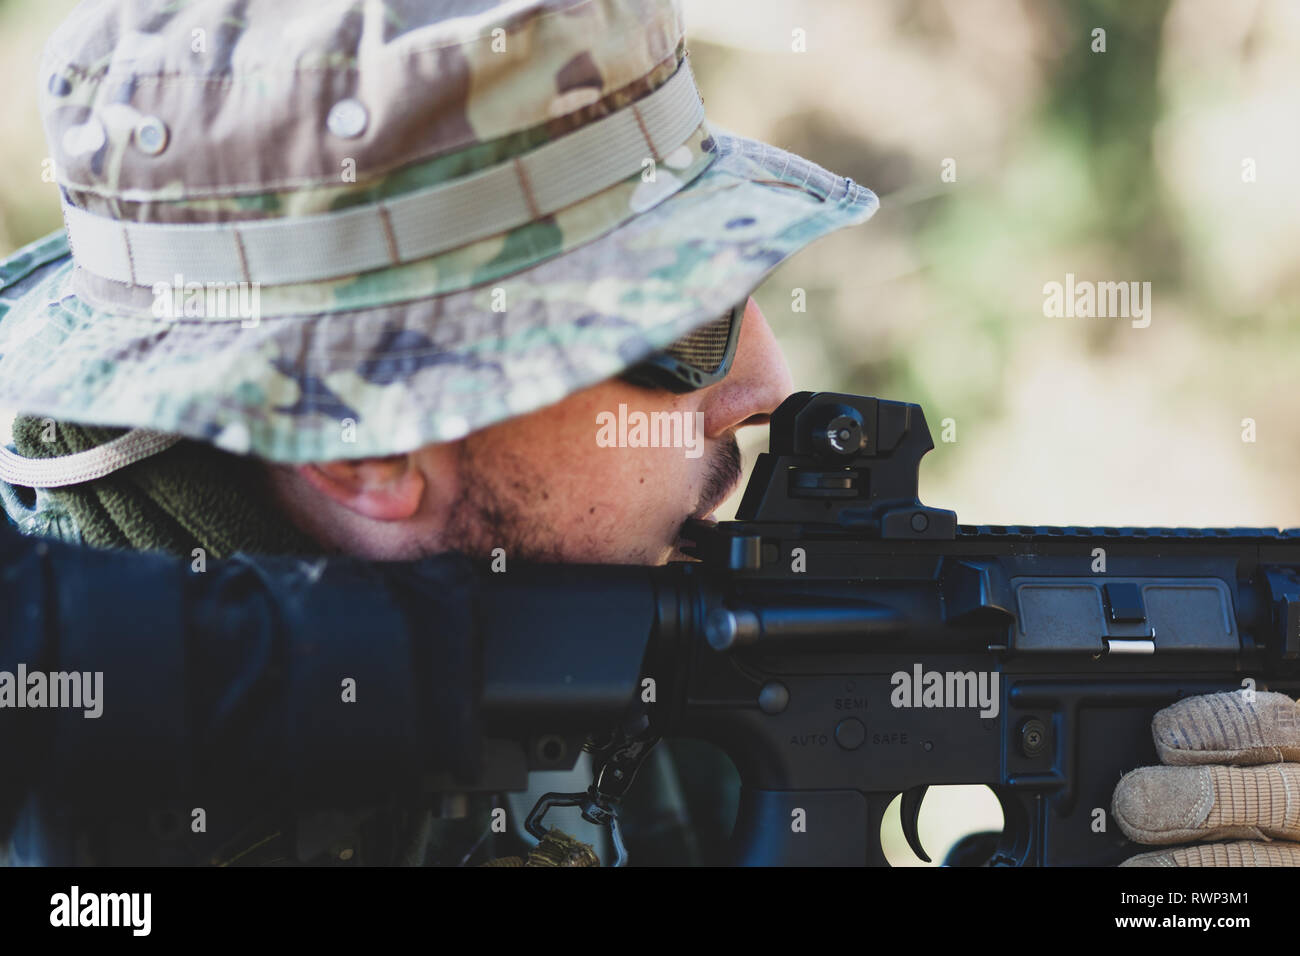 Airsoft military game player in camouflage uniform with armed assault rifle. Stock Photo